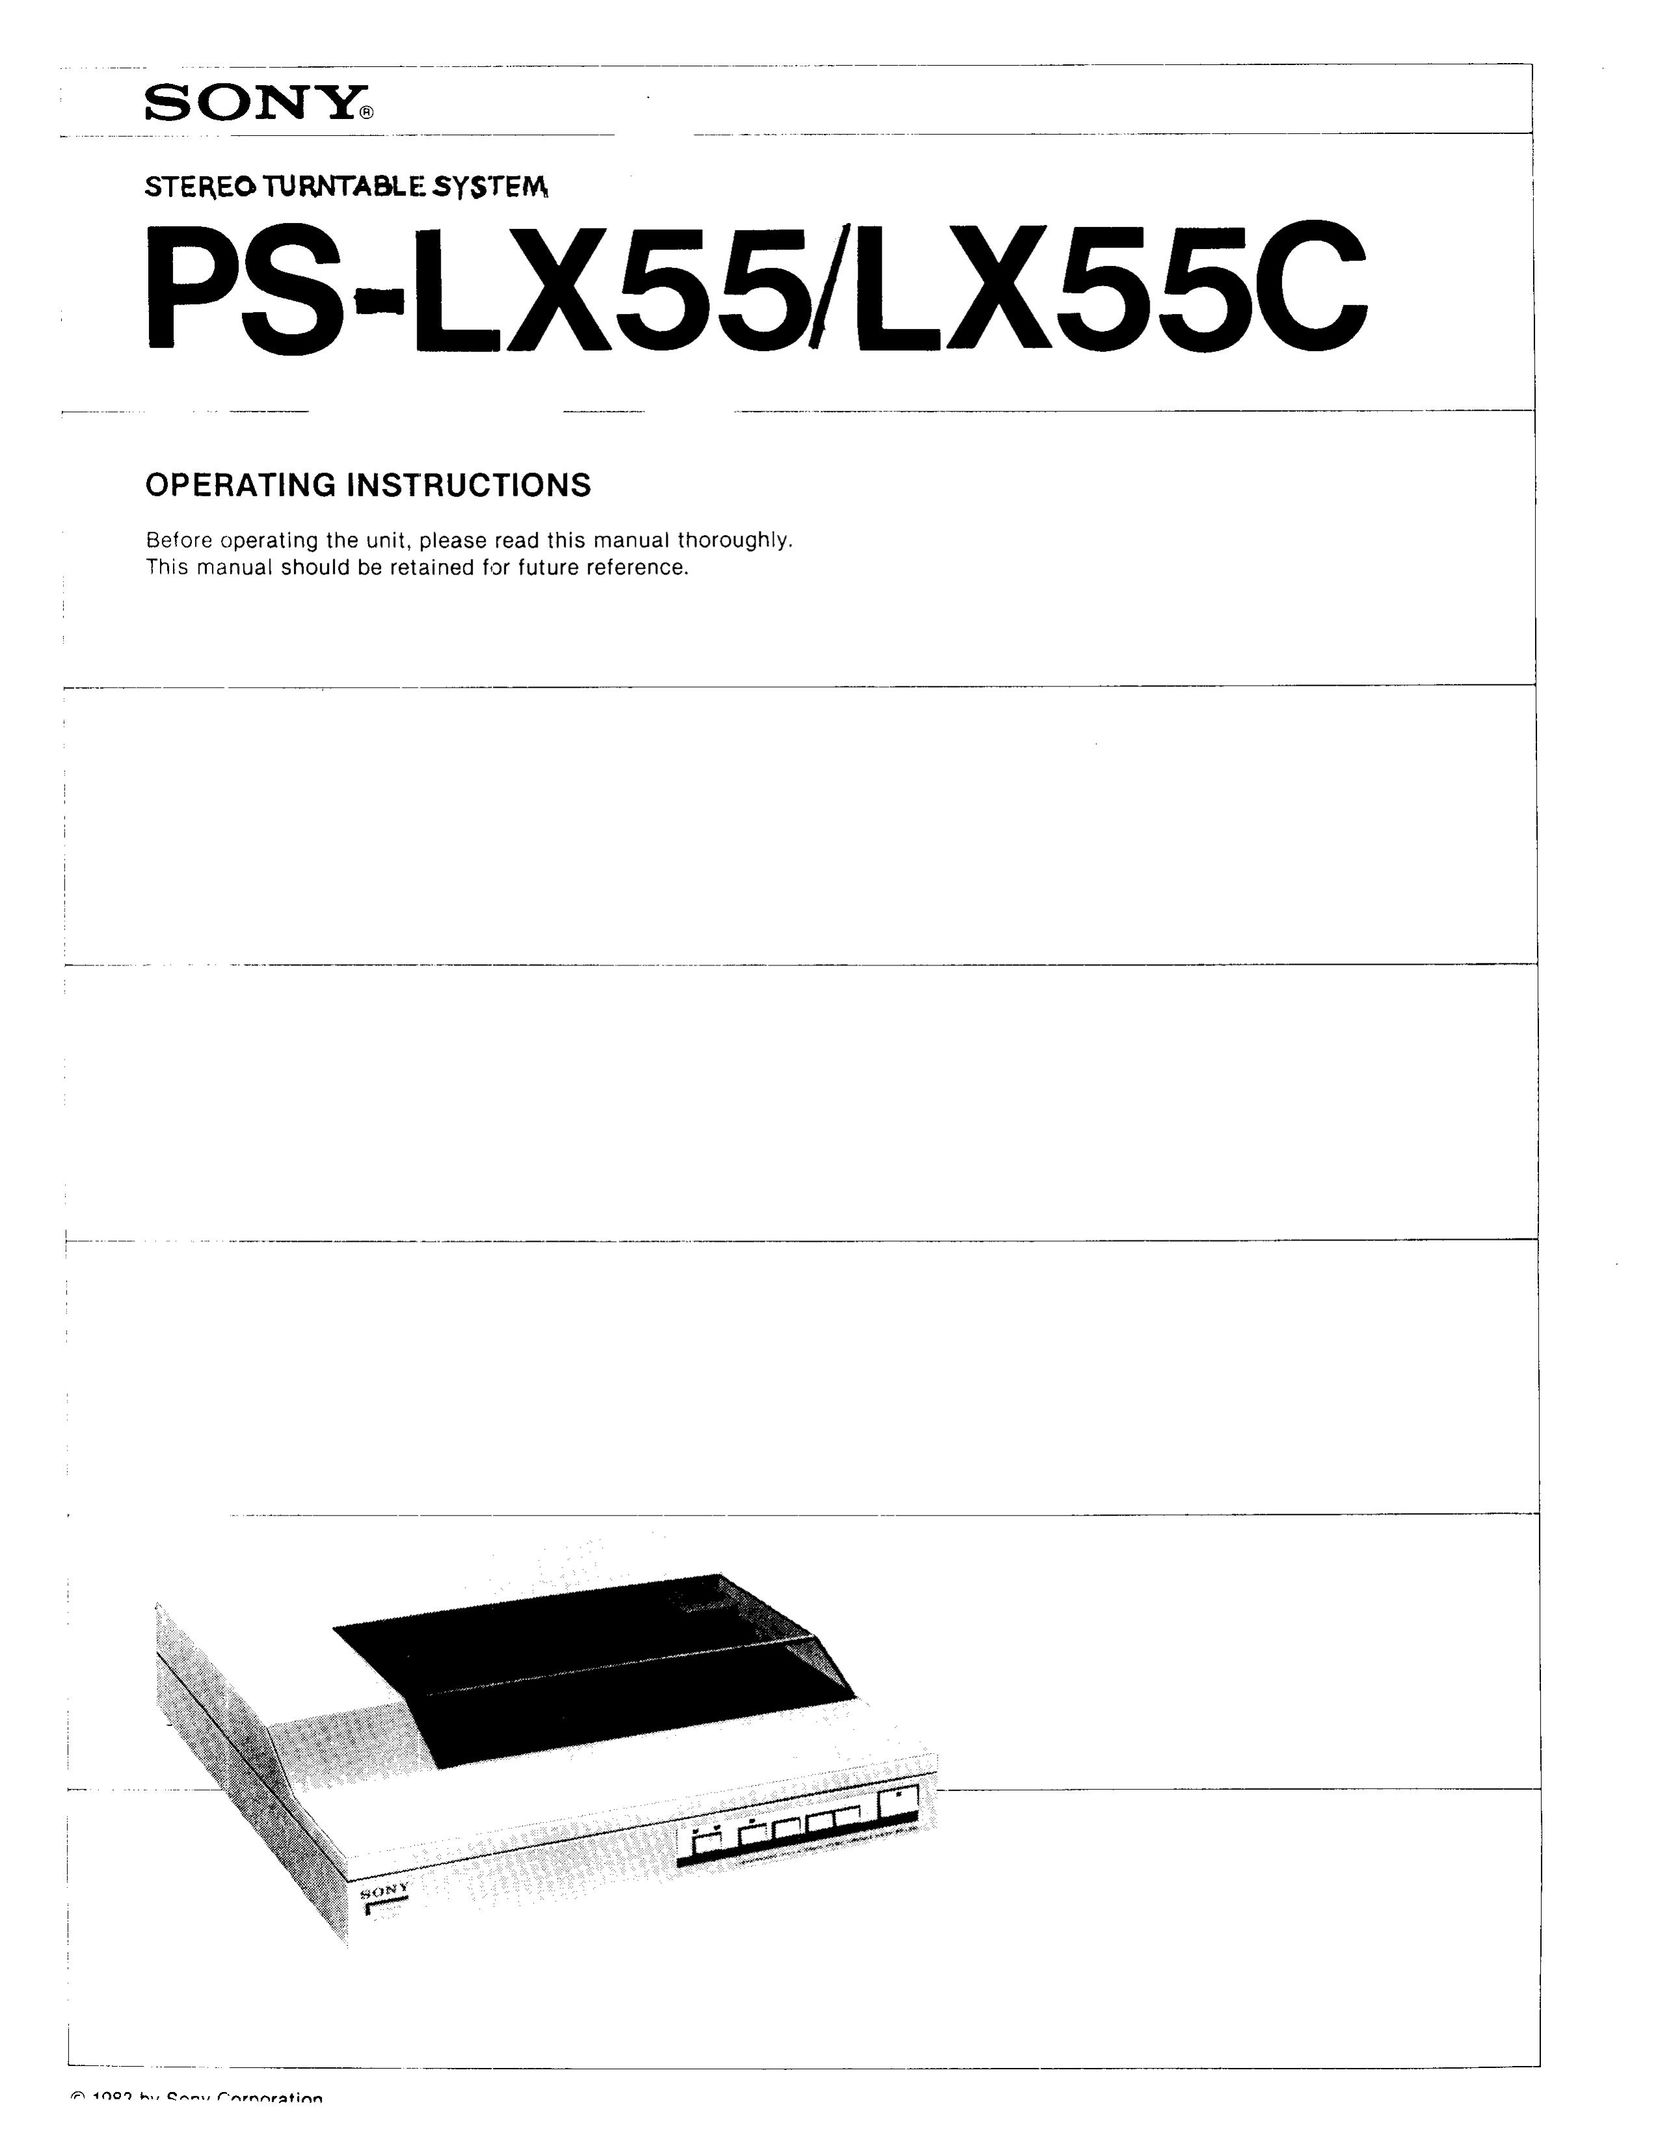 Sony PS-LX55 Turntable User Manual